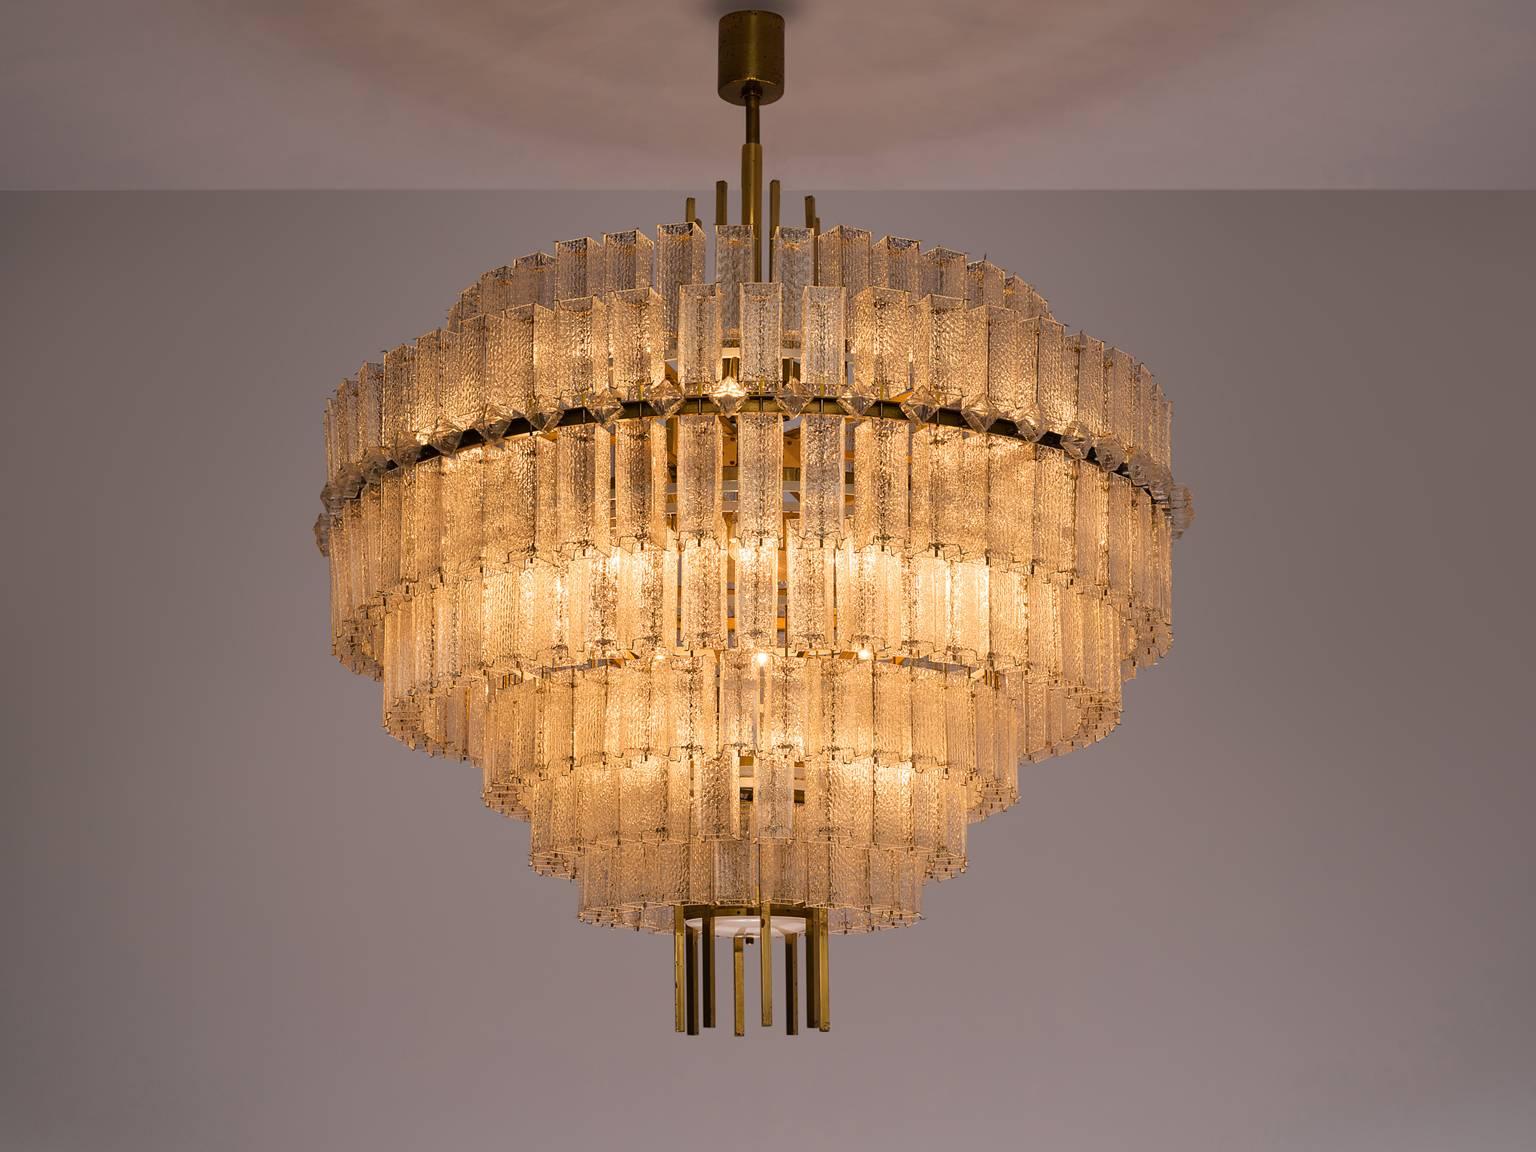 Chandelier, in glass and brass, Europe, 1970s. 

Large circular 200 cm/6.5 ft chandelier with seven layers of glass shades. The frame is made of brass and holds numerous structured glass 'tubes' with a brass centre. Due the combination of materials